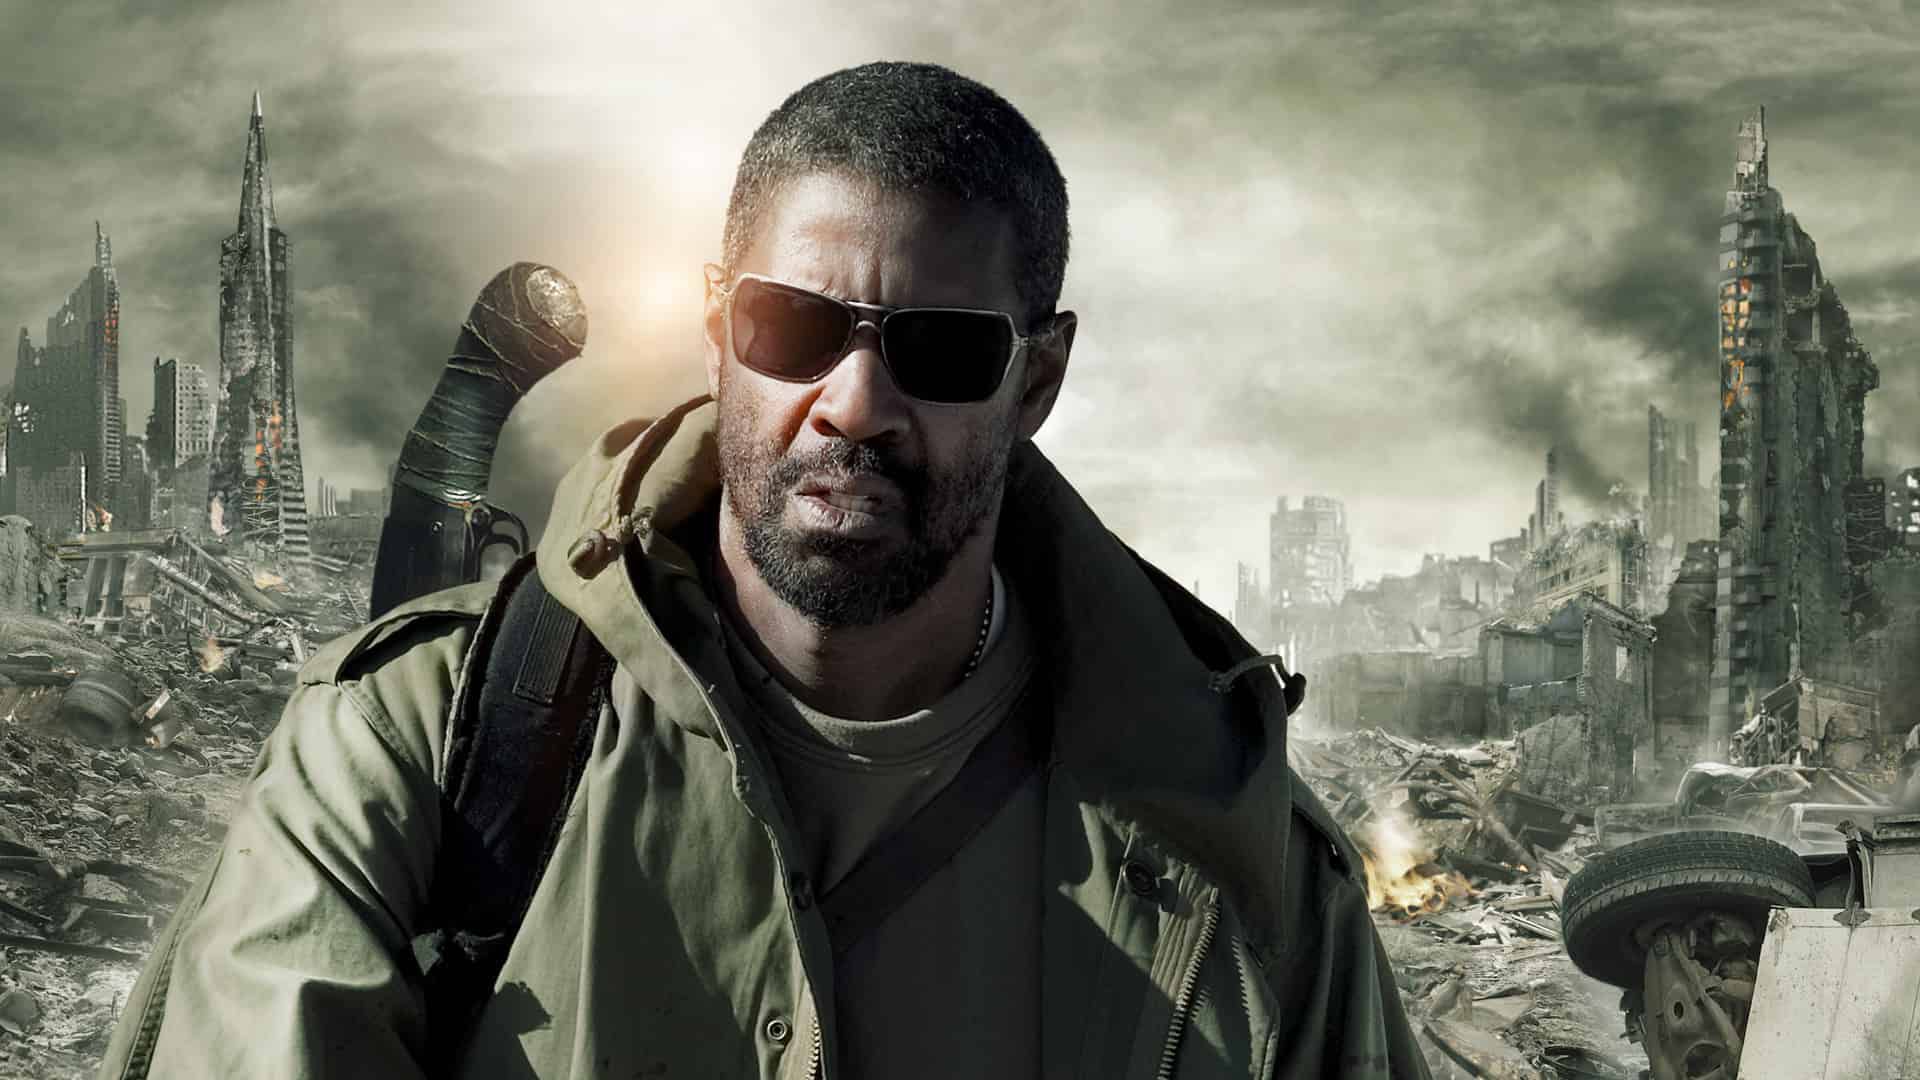 The 15 Best Post-Apocalyptic Movies of the Last Decade